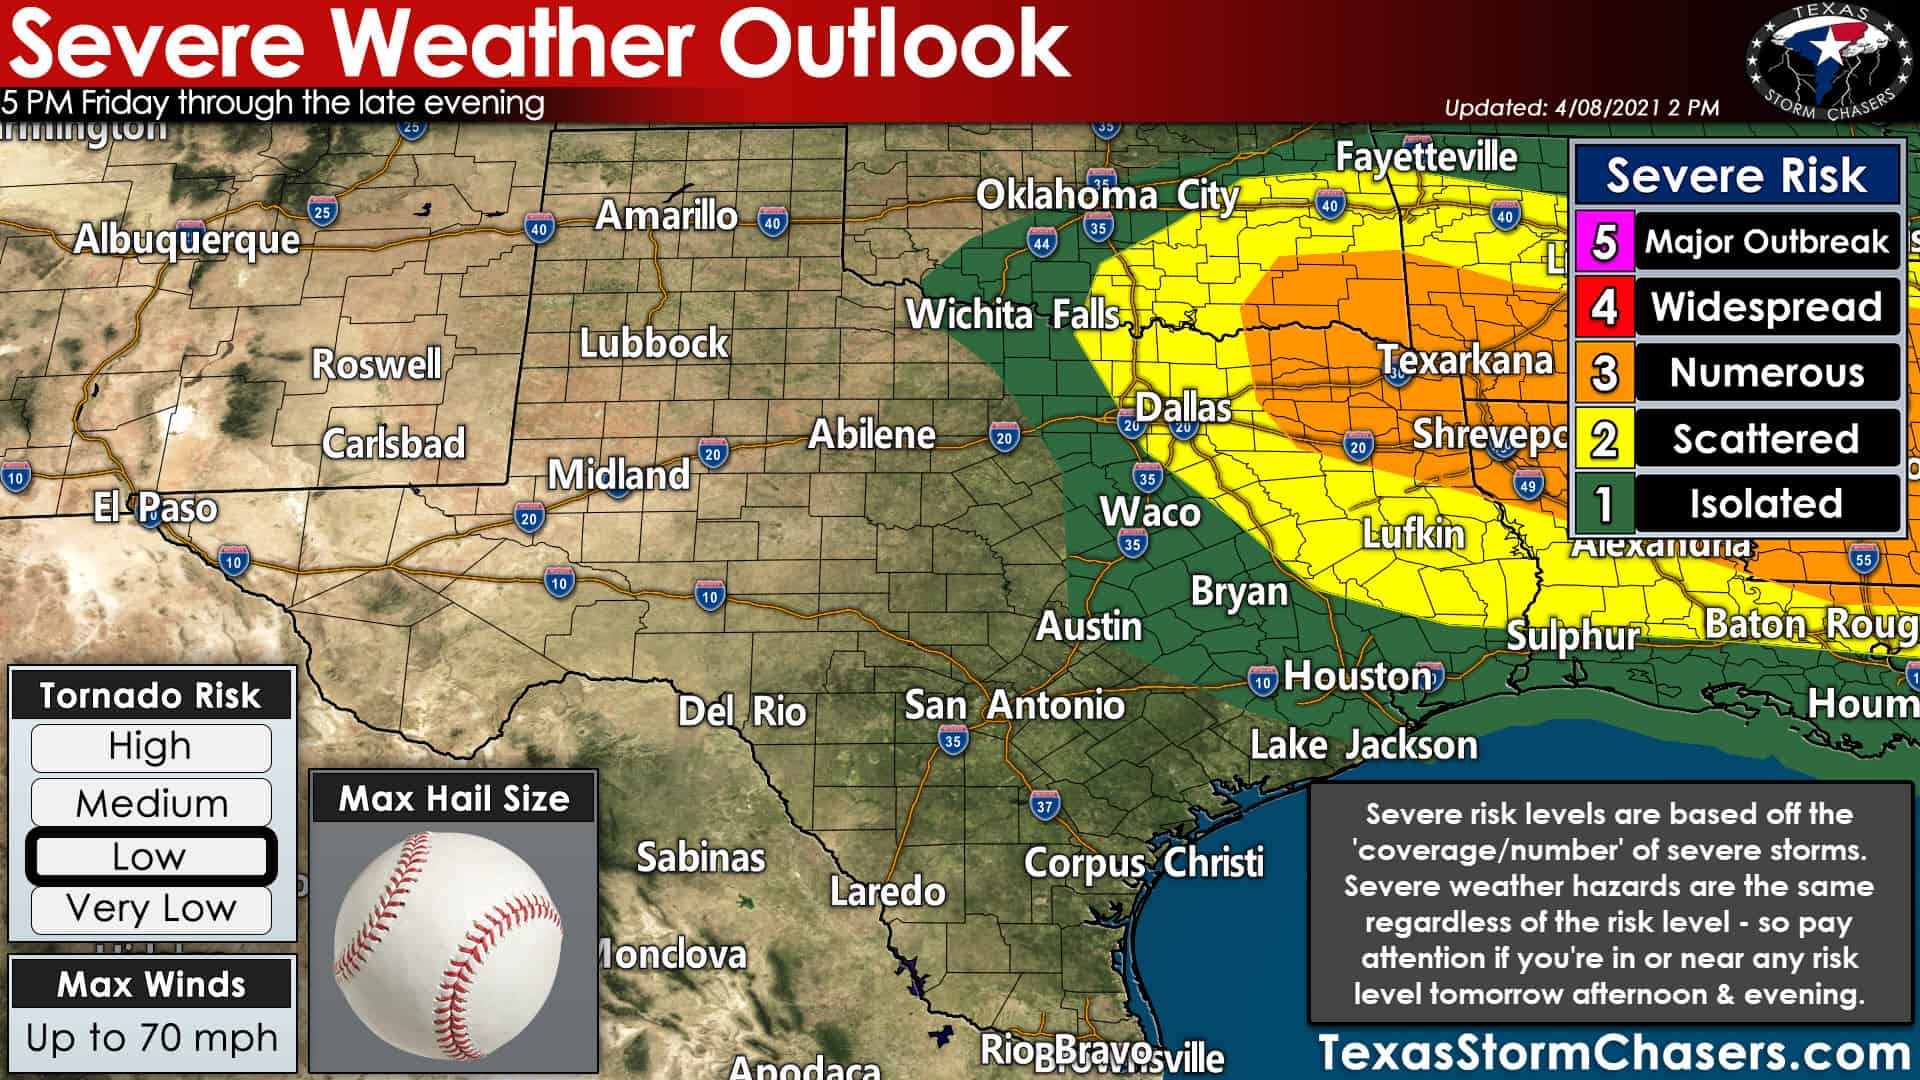 Conditional, but impactful severe storm chances tomorrow evening in North/Northeast Texas